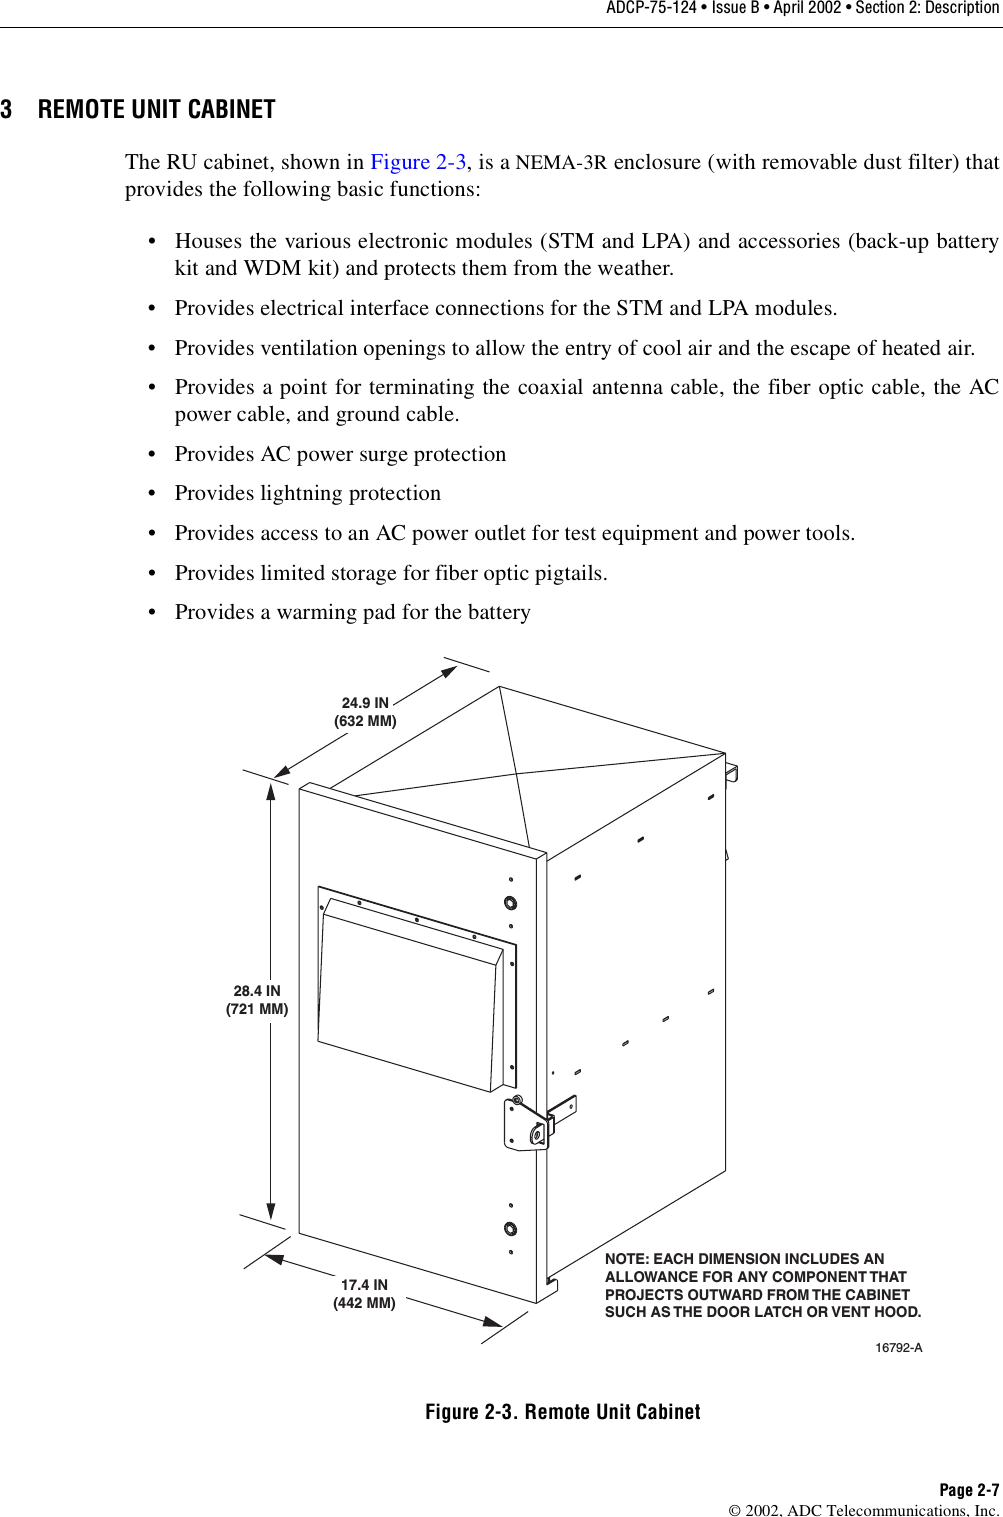 ADCP-75-124 • Issue B • April 2002 • Section 2: DescriptionPage 2-7©2002, ADC Telecommunications, Inc.3 REMOTE UNIT CABINETThe RU cabinet, shown in Figure 2-3,is aNEMA-3R enclosure (with removable dust filter) thatprovides the following basic functions:• Houses the various electronic modules (STM and LPA) and accessories (back-up batterykit and WDM kit) and protects them from the weather.• Provides electrical interface connections for the STM and LPA modules.• Provides ventilation openings to allow the entry of cool air and the escape of heated air.• Provides apoint for terminating the coaxial antenna cable, the fiber optic cable, the ACpower cable, and ground cable.• Provides AC power surge protection• Provides lightning protection• Provides access to an AC power outlet for test equipment and power tools.• Provides limited storage for fiber optic pigtails.• Provides awarming pad for the batteryFigure 2-3. Remote Unit Cabinet16792-A24.9 IN(632 MM)28.4 IN(721 MM)17.4 IN(442 MM)NOTE: EACH DIMENSION INCLUDES ANALLOWANCE FOR ANY COMPONENT THATPROJECTS OUTWARD FROM THE CABINETSUCH AS THE DOOR LATCH OR VENT HOOD.